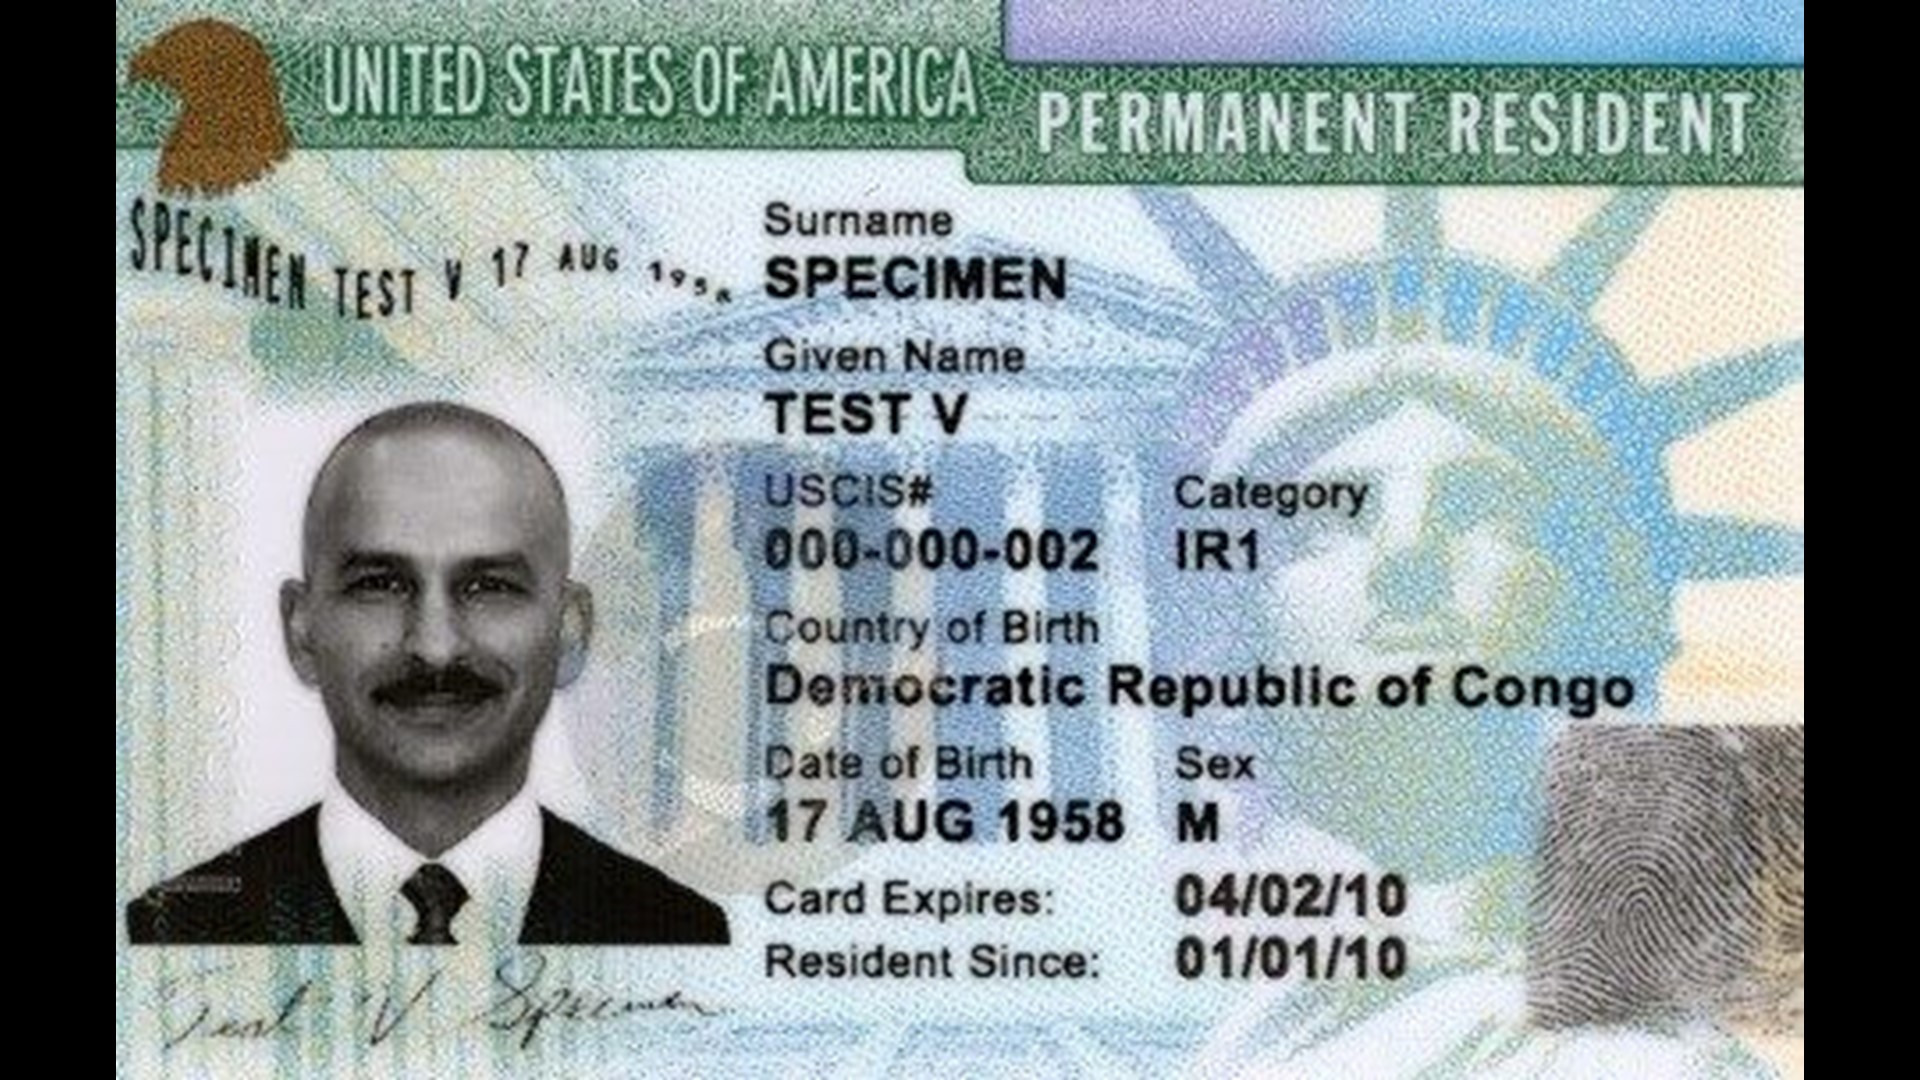 USCIS recalls thousands of Permanent Resident cards due to production